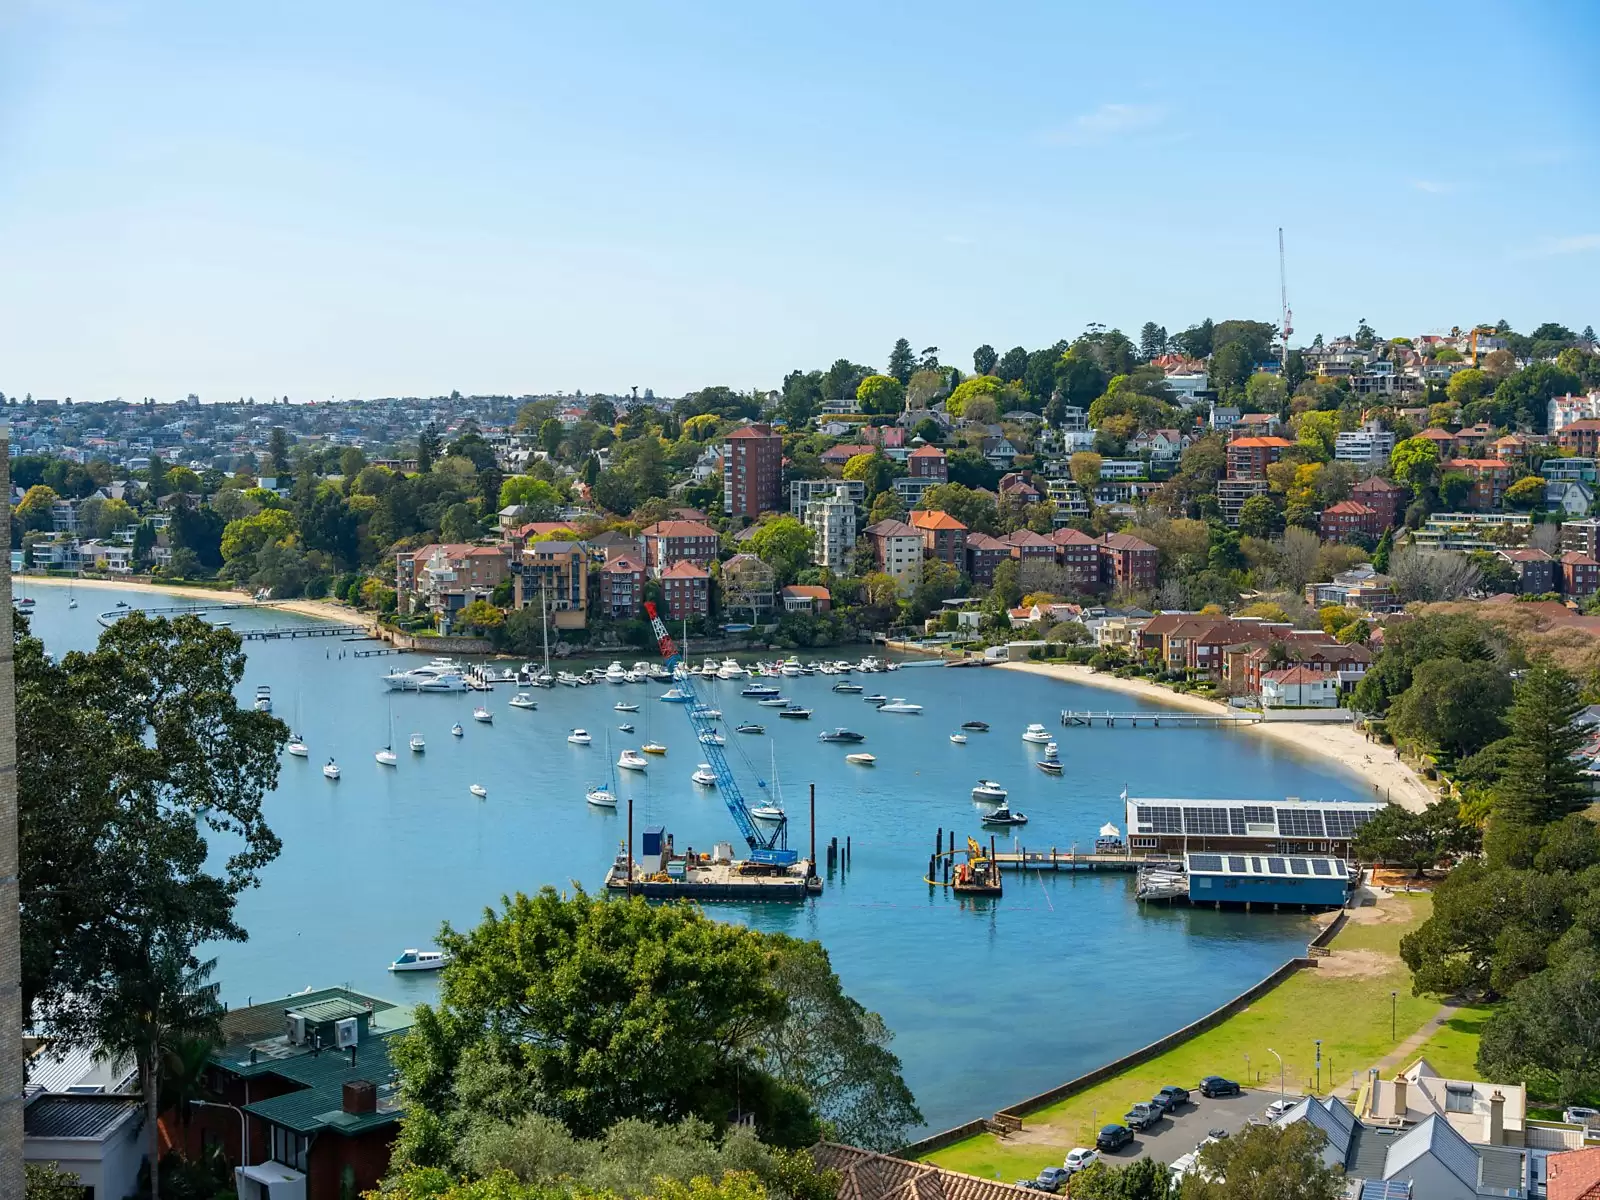 Photo #11: 11/14 Eastbourne Road, Darling Point - Sold by Sydney Sotheby's International Realty